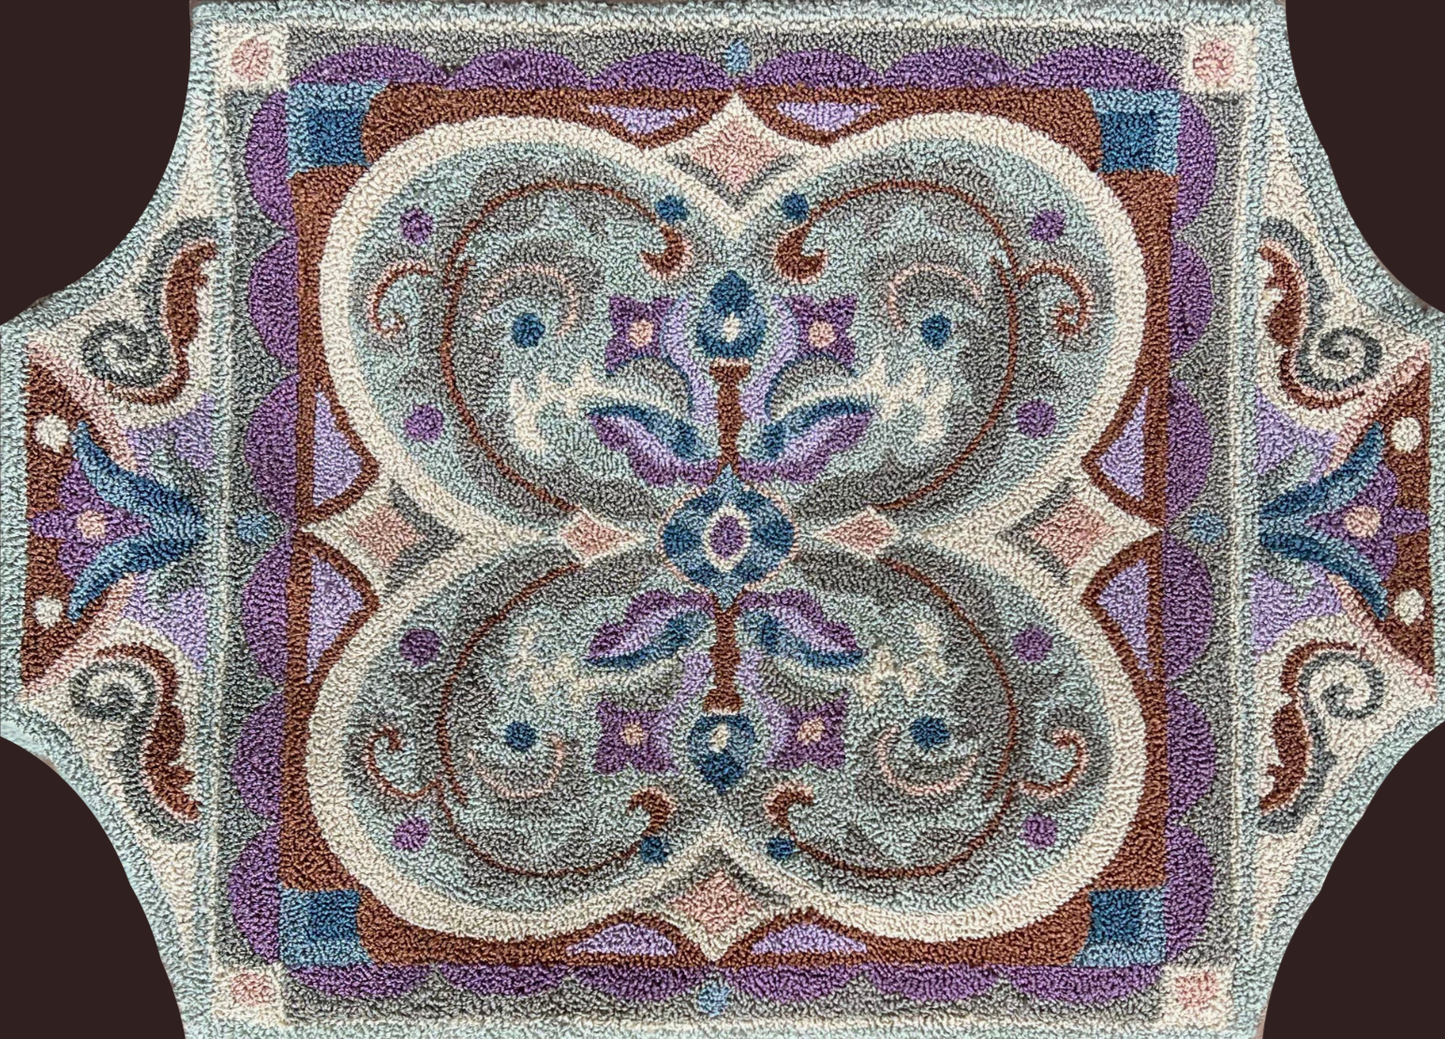  Misty Lavender- Rug Hooking Paper Pattern by Orphaned Wool. This is a beautifully designed intricate design using lavender and soft hue colors to create a stunning designed hooked rug. Copyright 2023 Kelly Kanyok